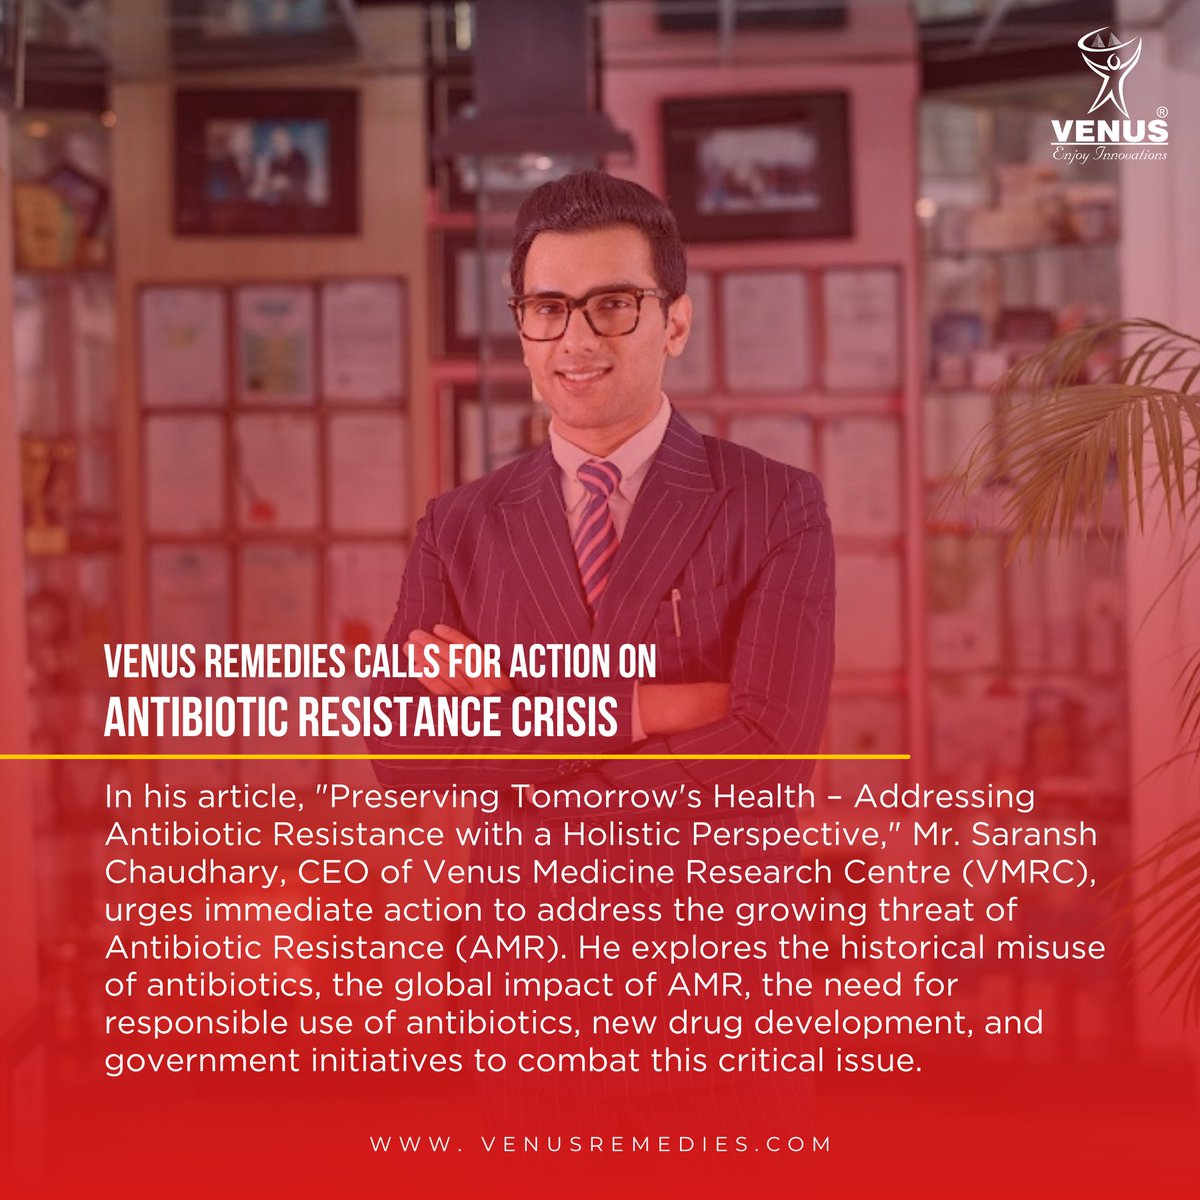 In a recent article for MediaBrief, Mr. Saransh Chaudhary, President, Global Critical Care, and CEO, Venus Medicine Research Centre, highlights the critical issue of Antibiotic Resistance (AMR).